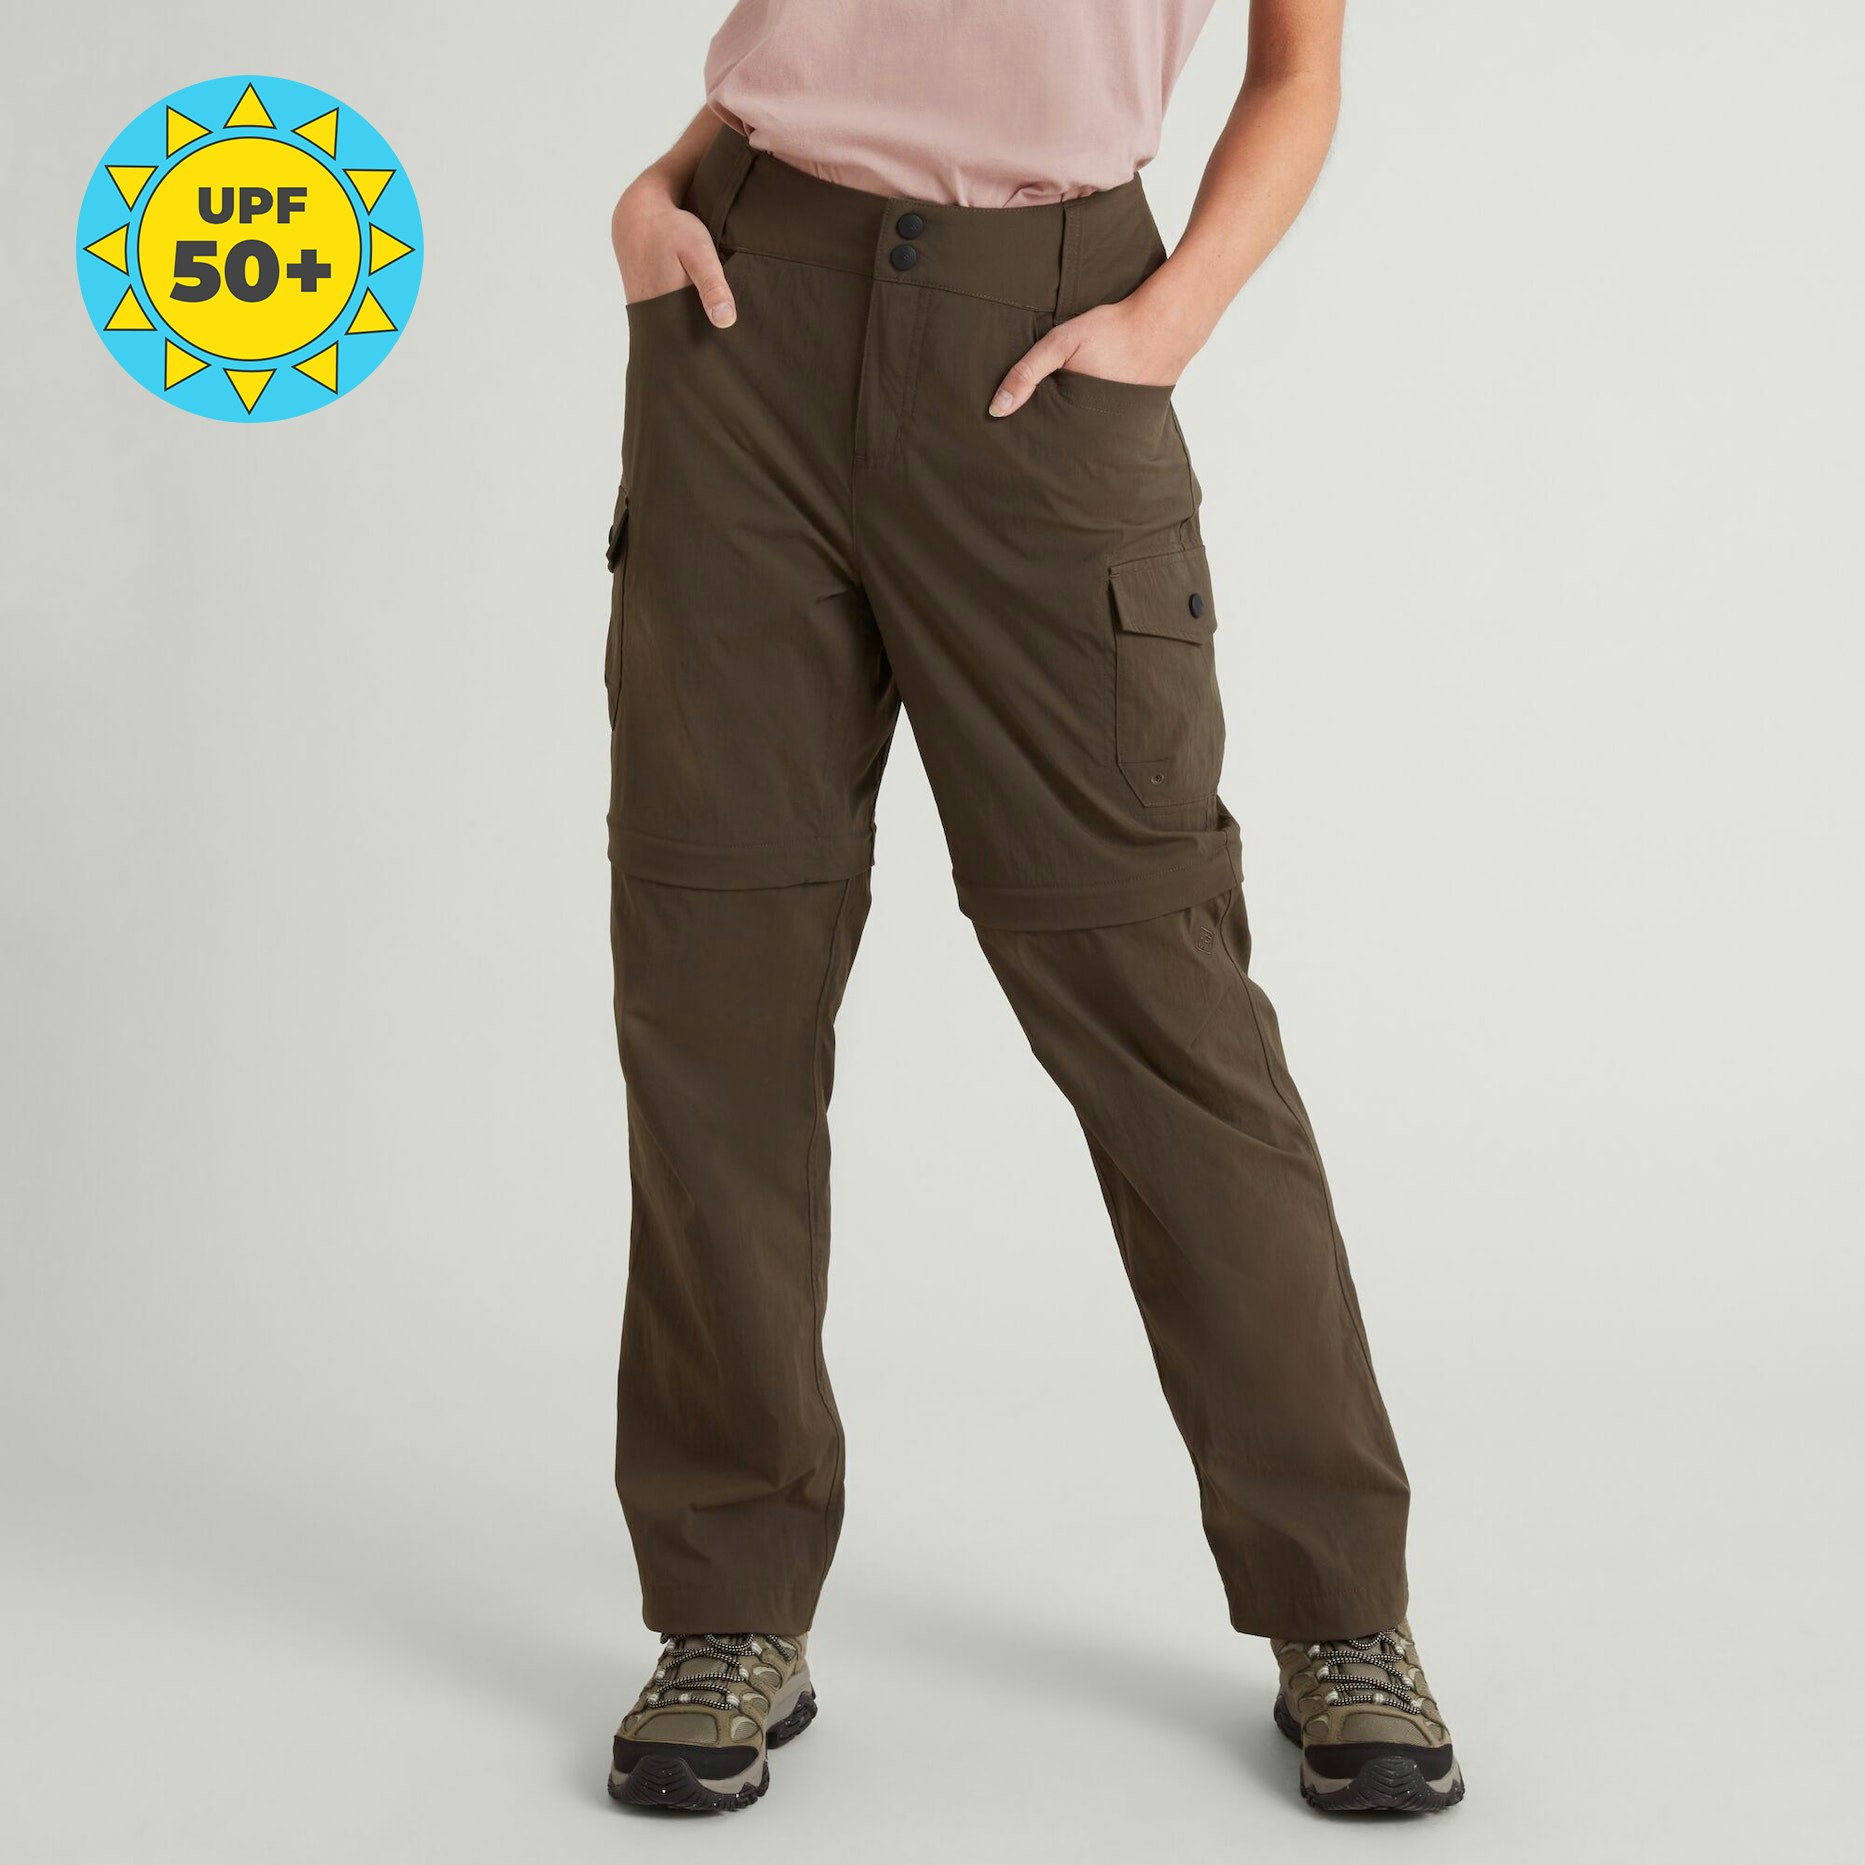 Clearance Pants for Women